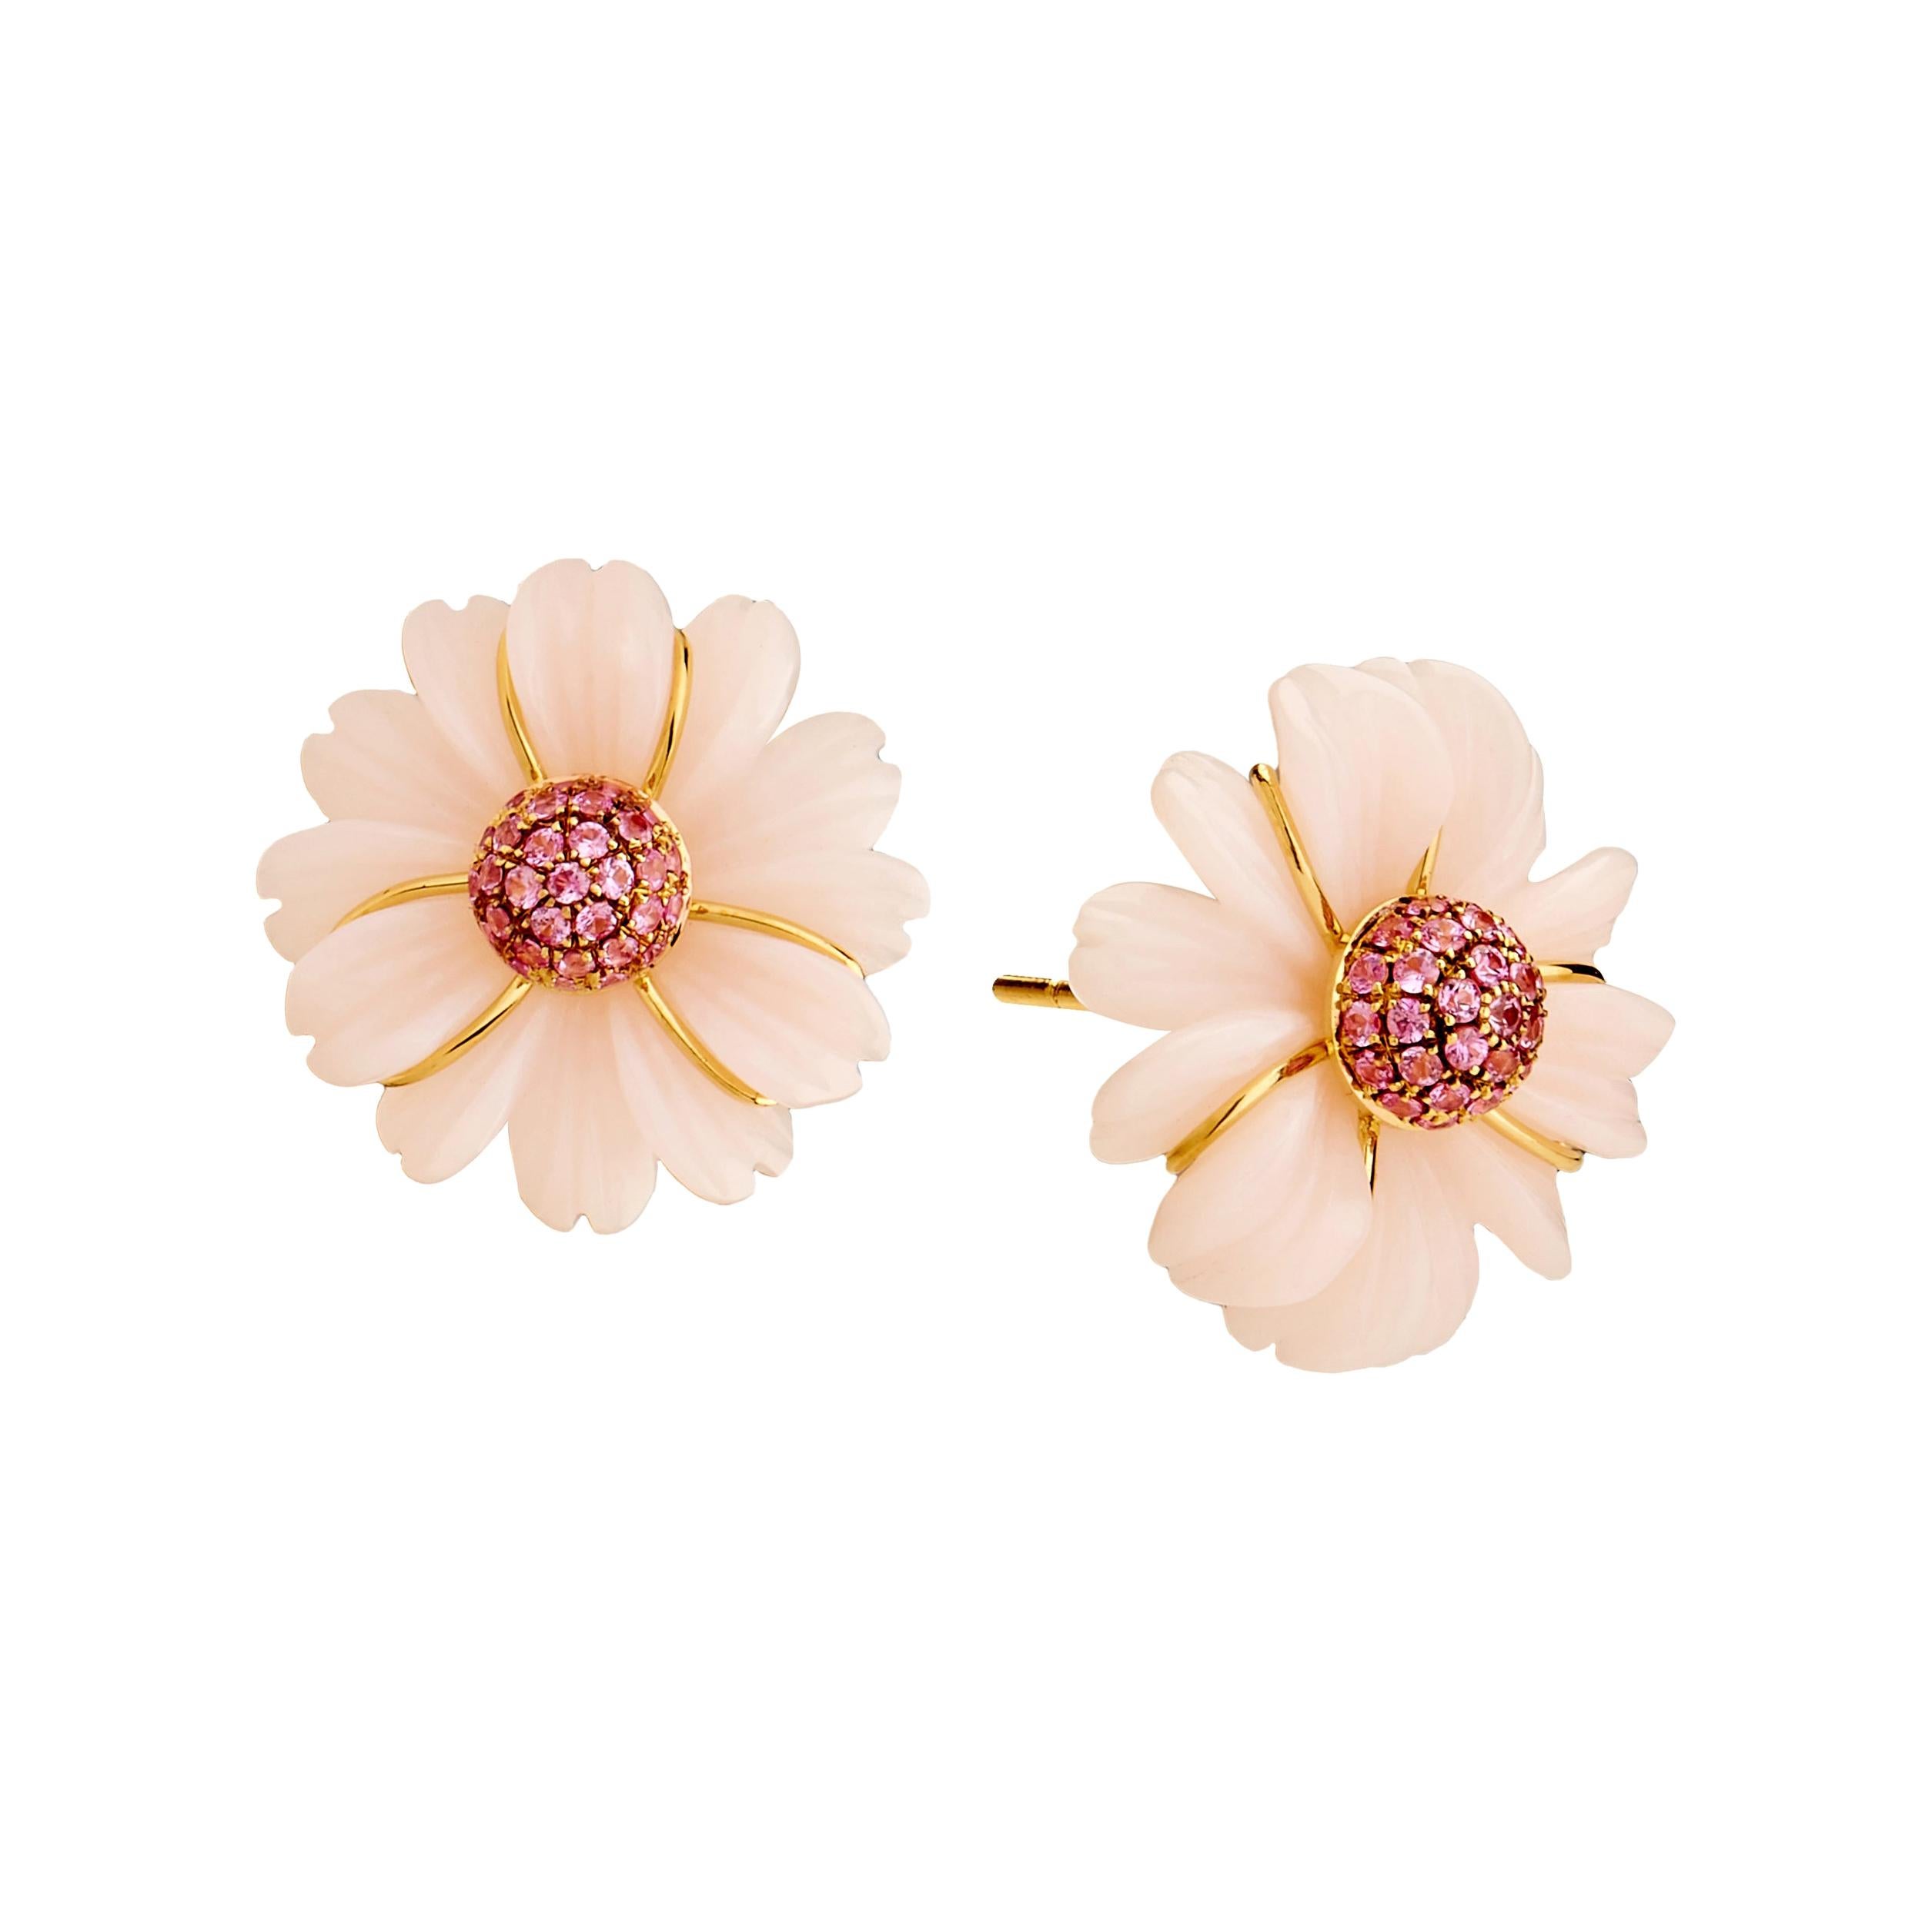 Syna Hand Crafted Pastel Pink Opal Flower Earrings with Pink Sapphires